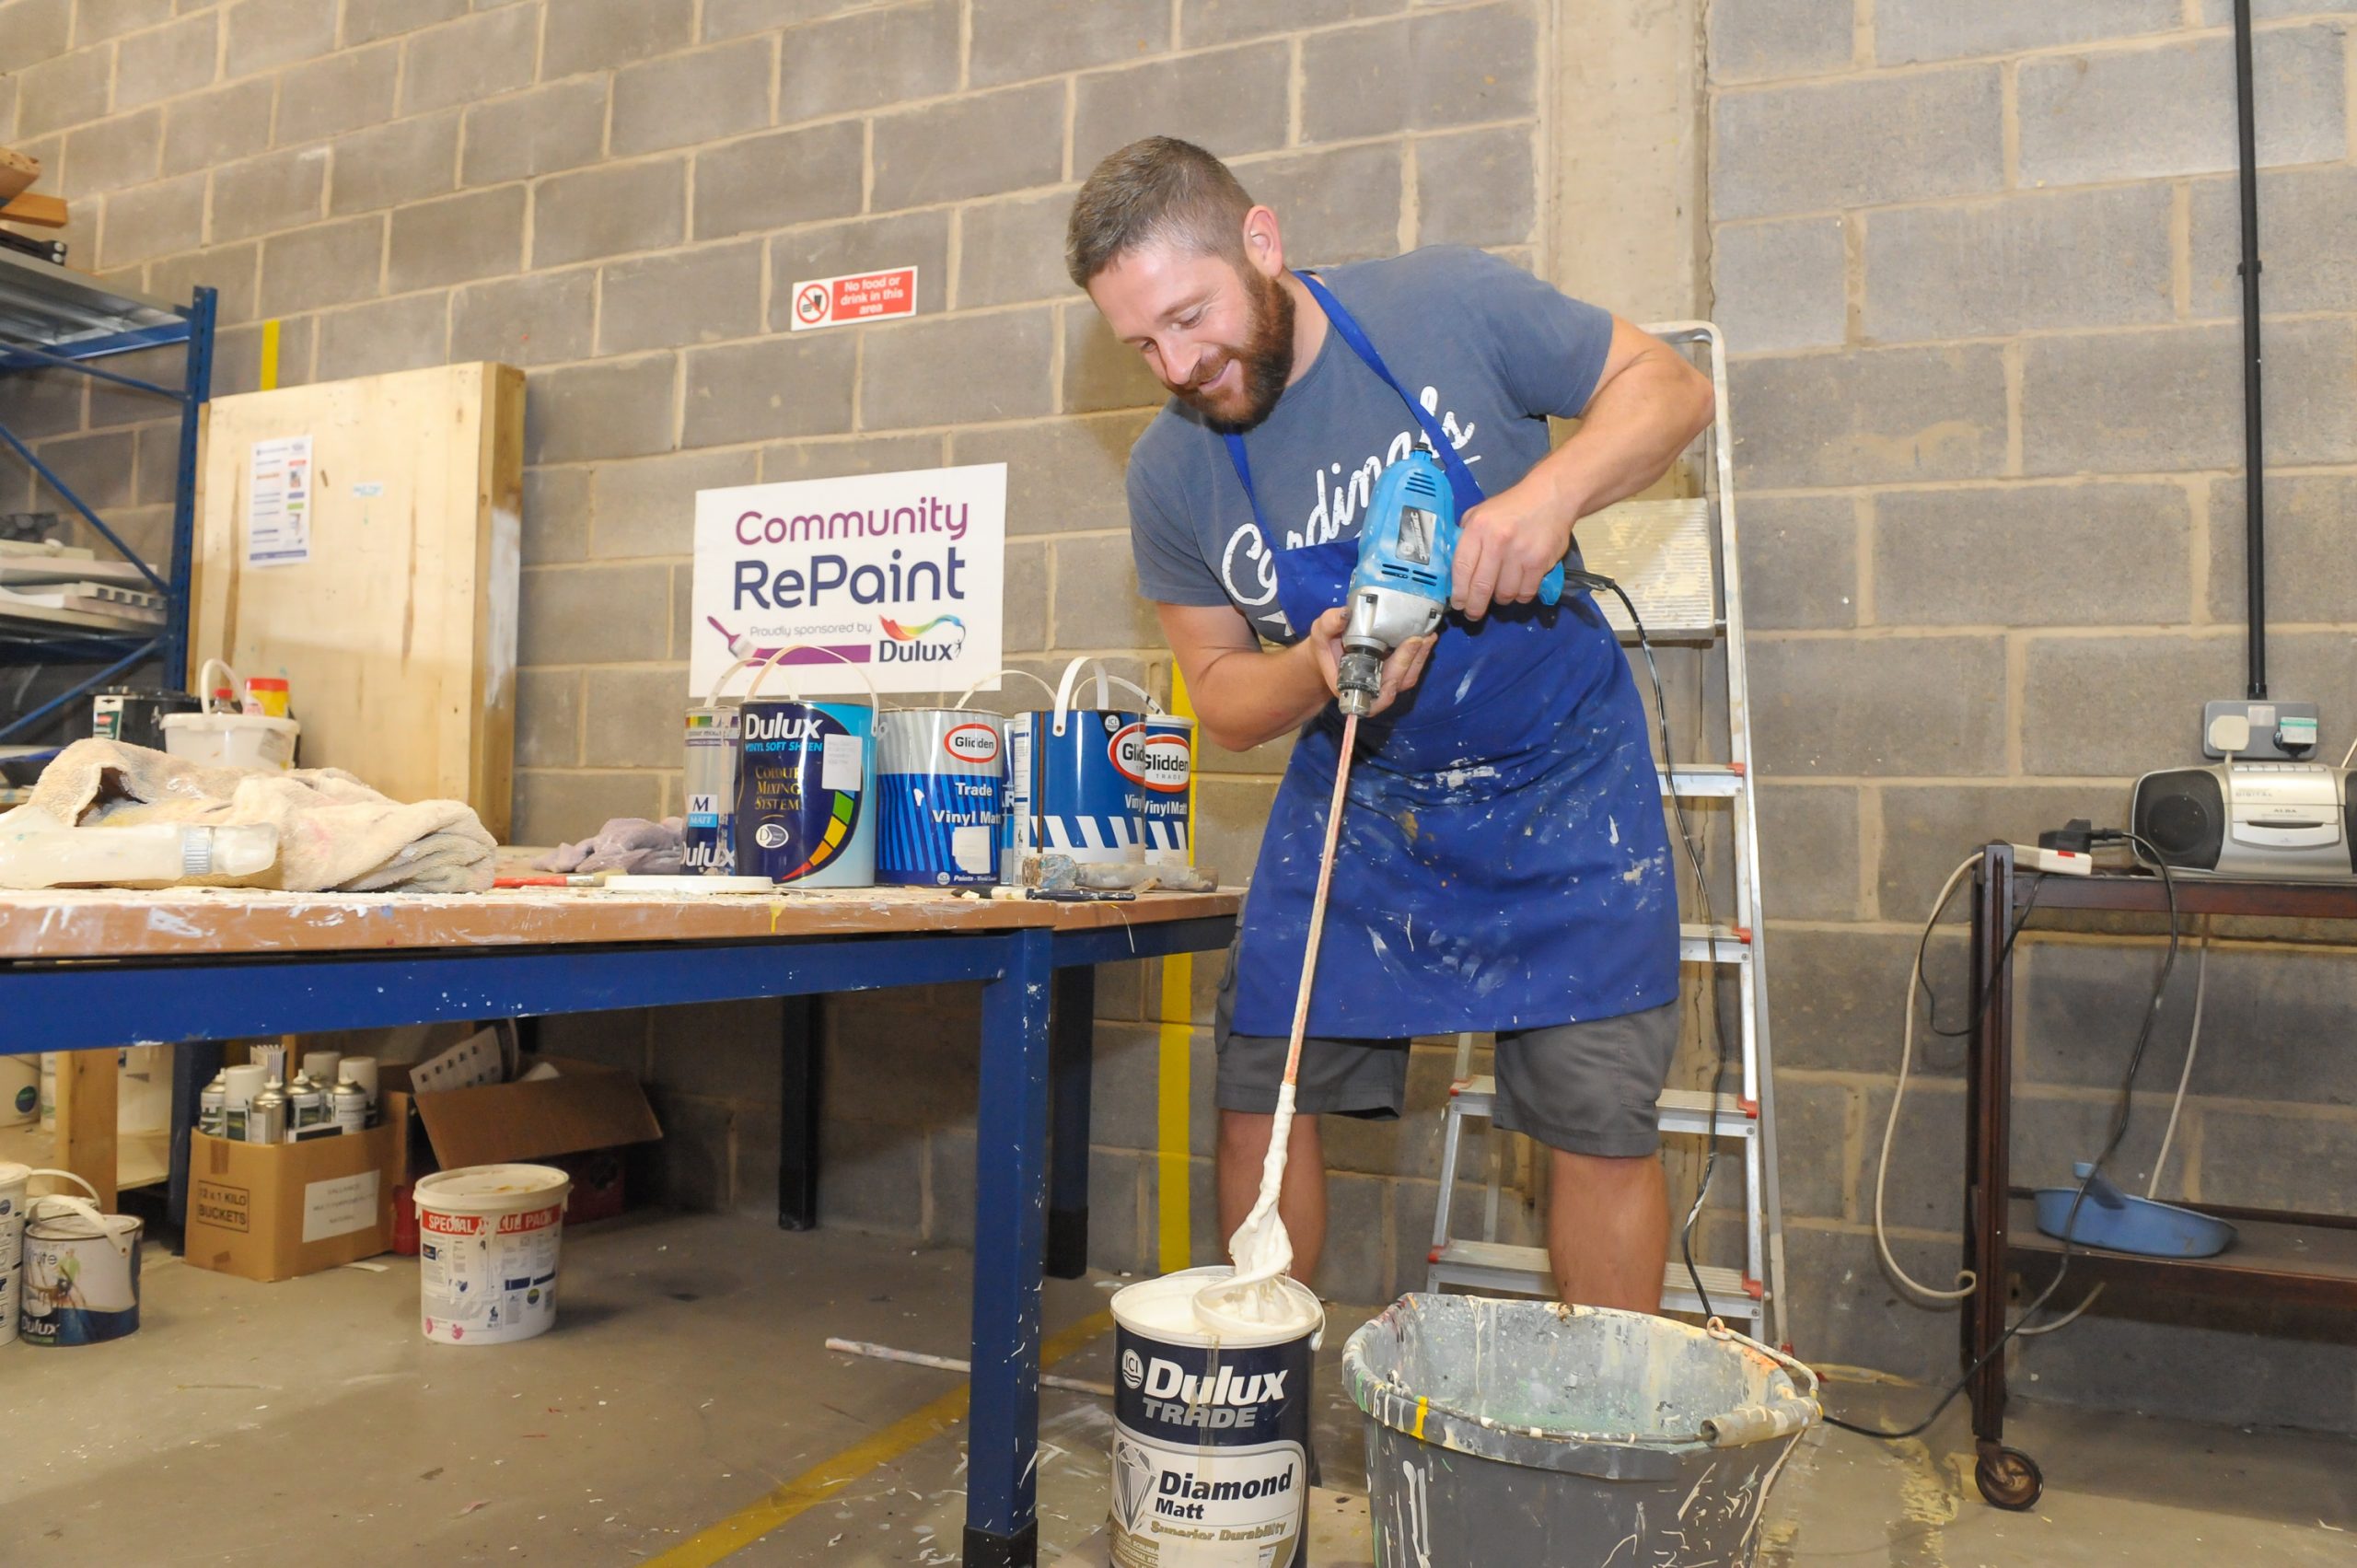 Paint processing with affordable, reusable paint at Community RePaint Loughborough